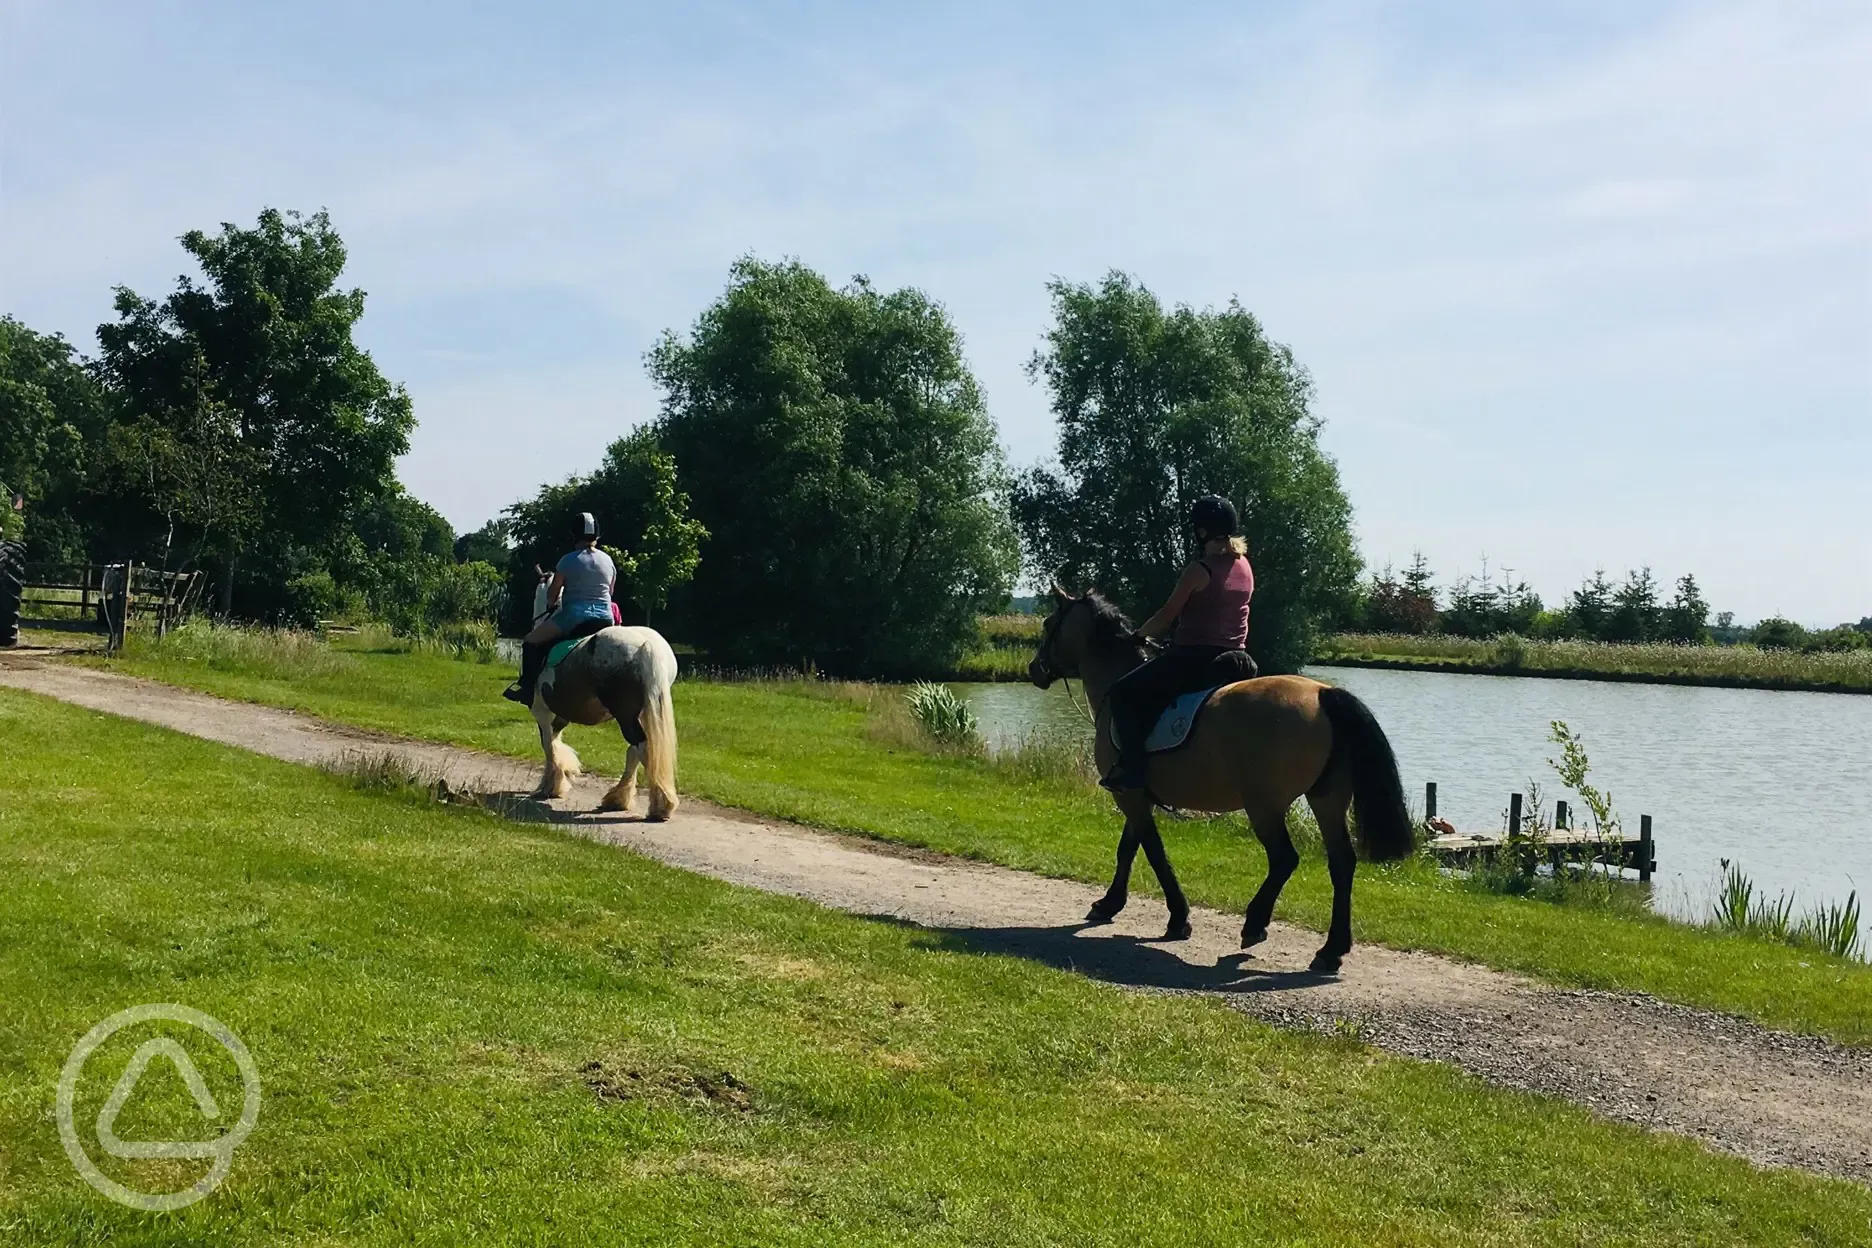 Bring your horse on holiday, bridle paths galore to explore